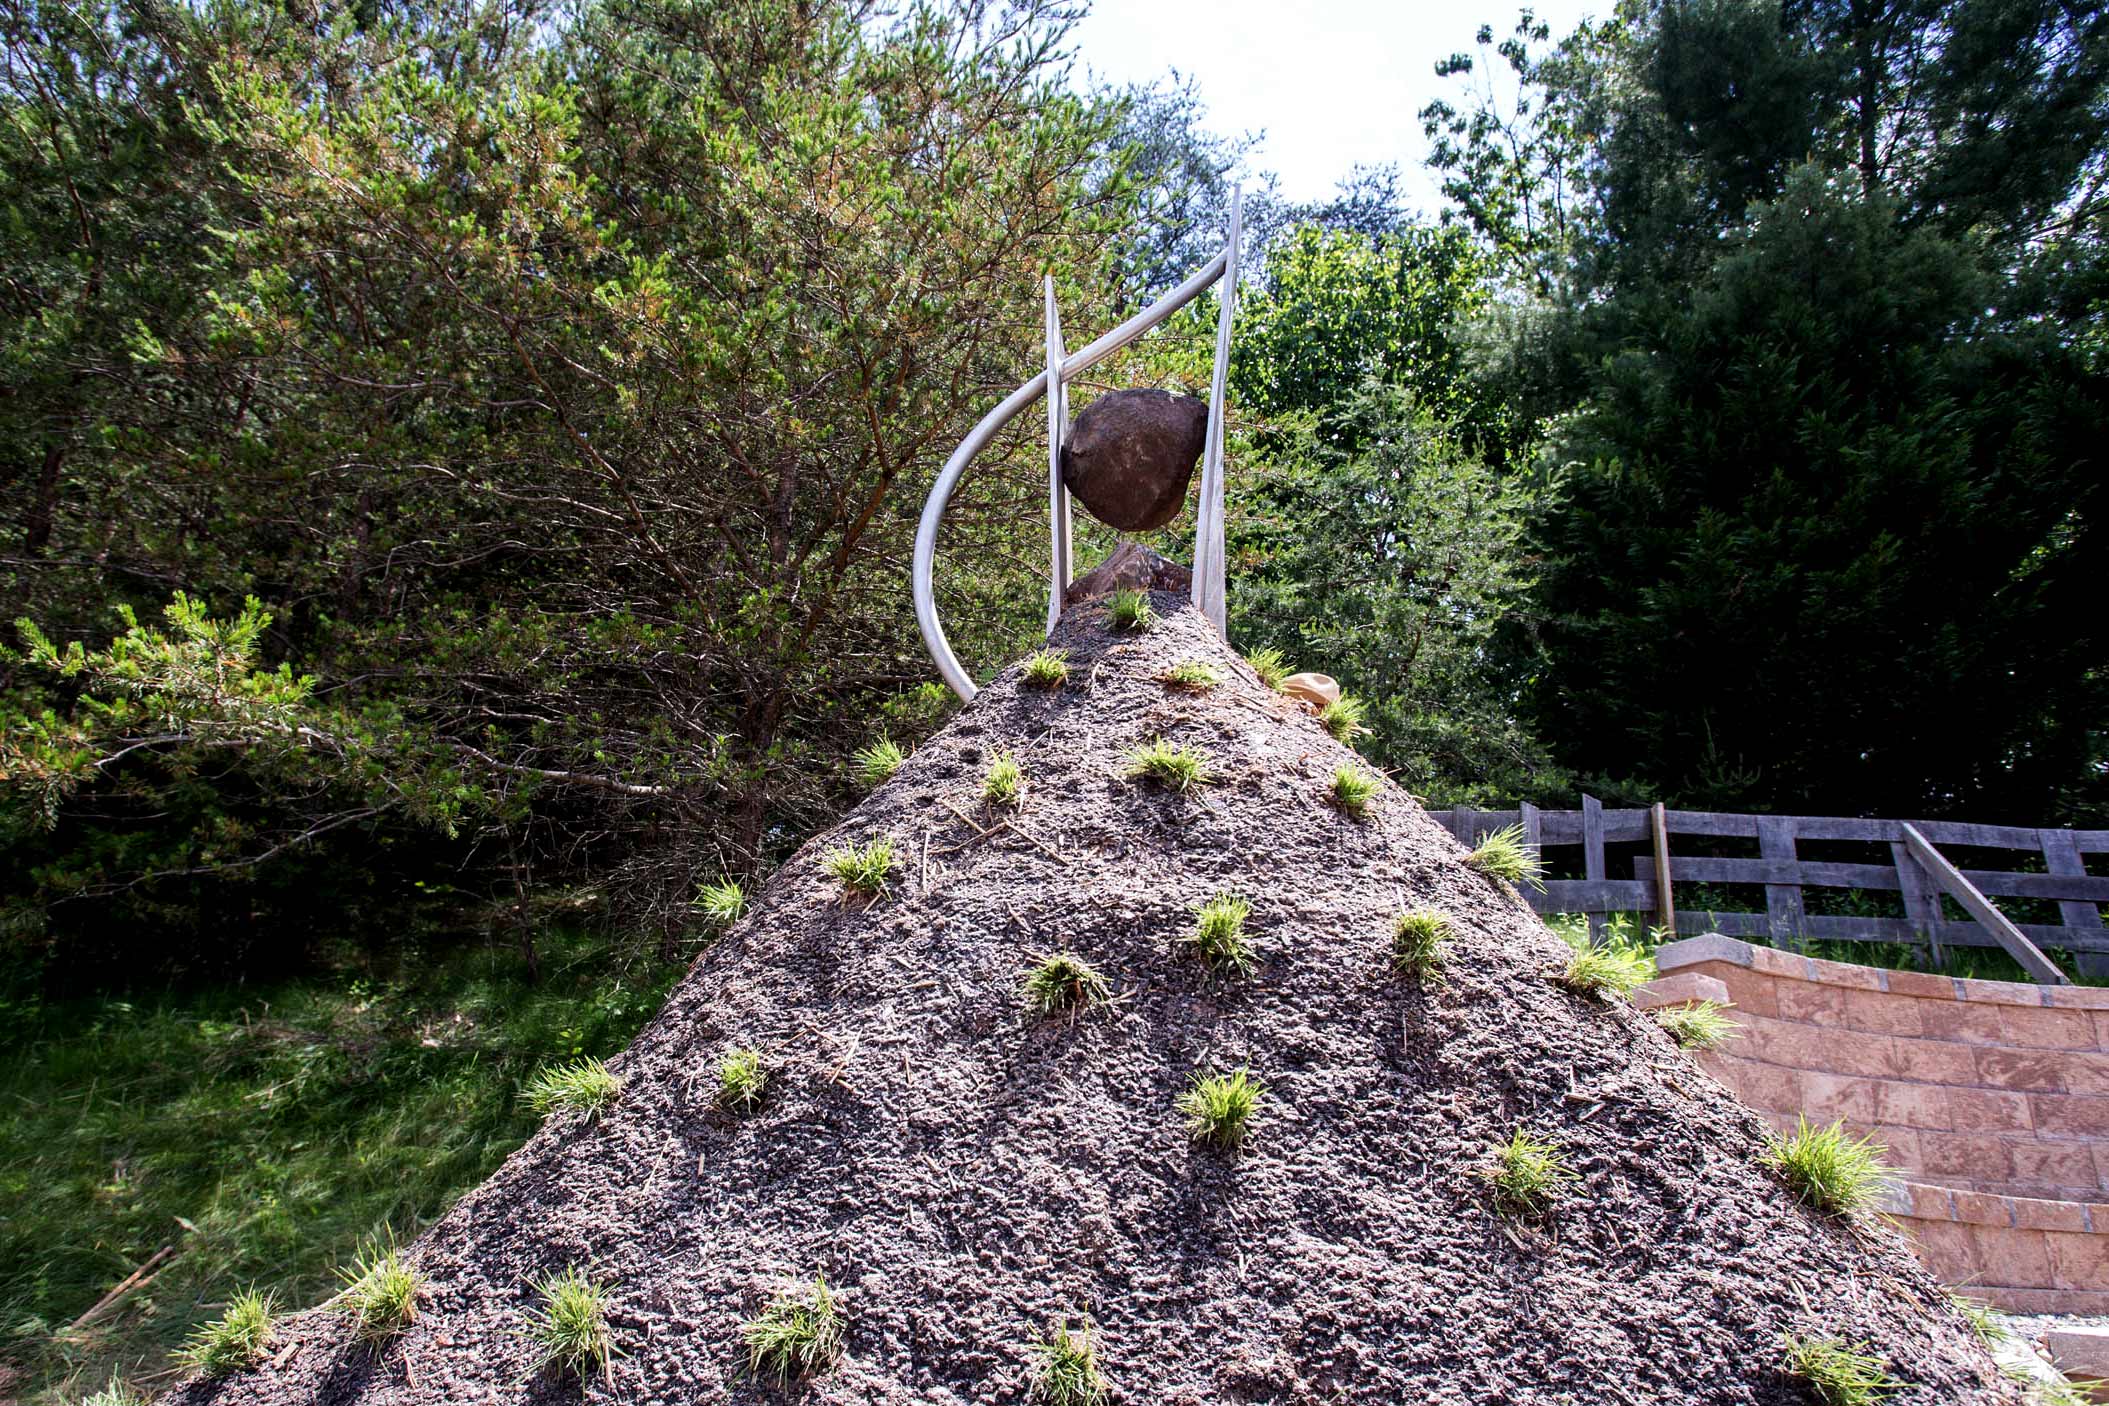 Only a few feet of Watson’s sculpture can be seen above the earthen mound containing more than 1,500 artifacts.